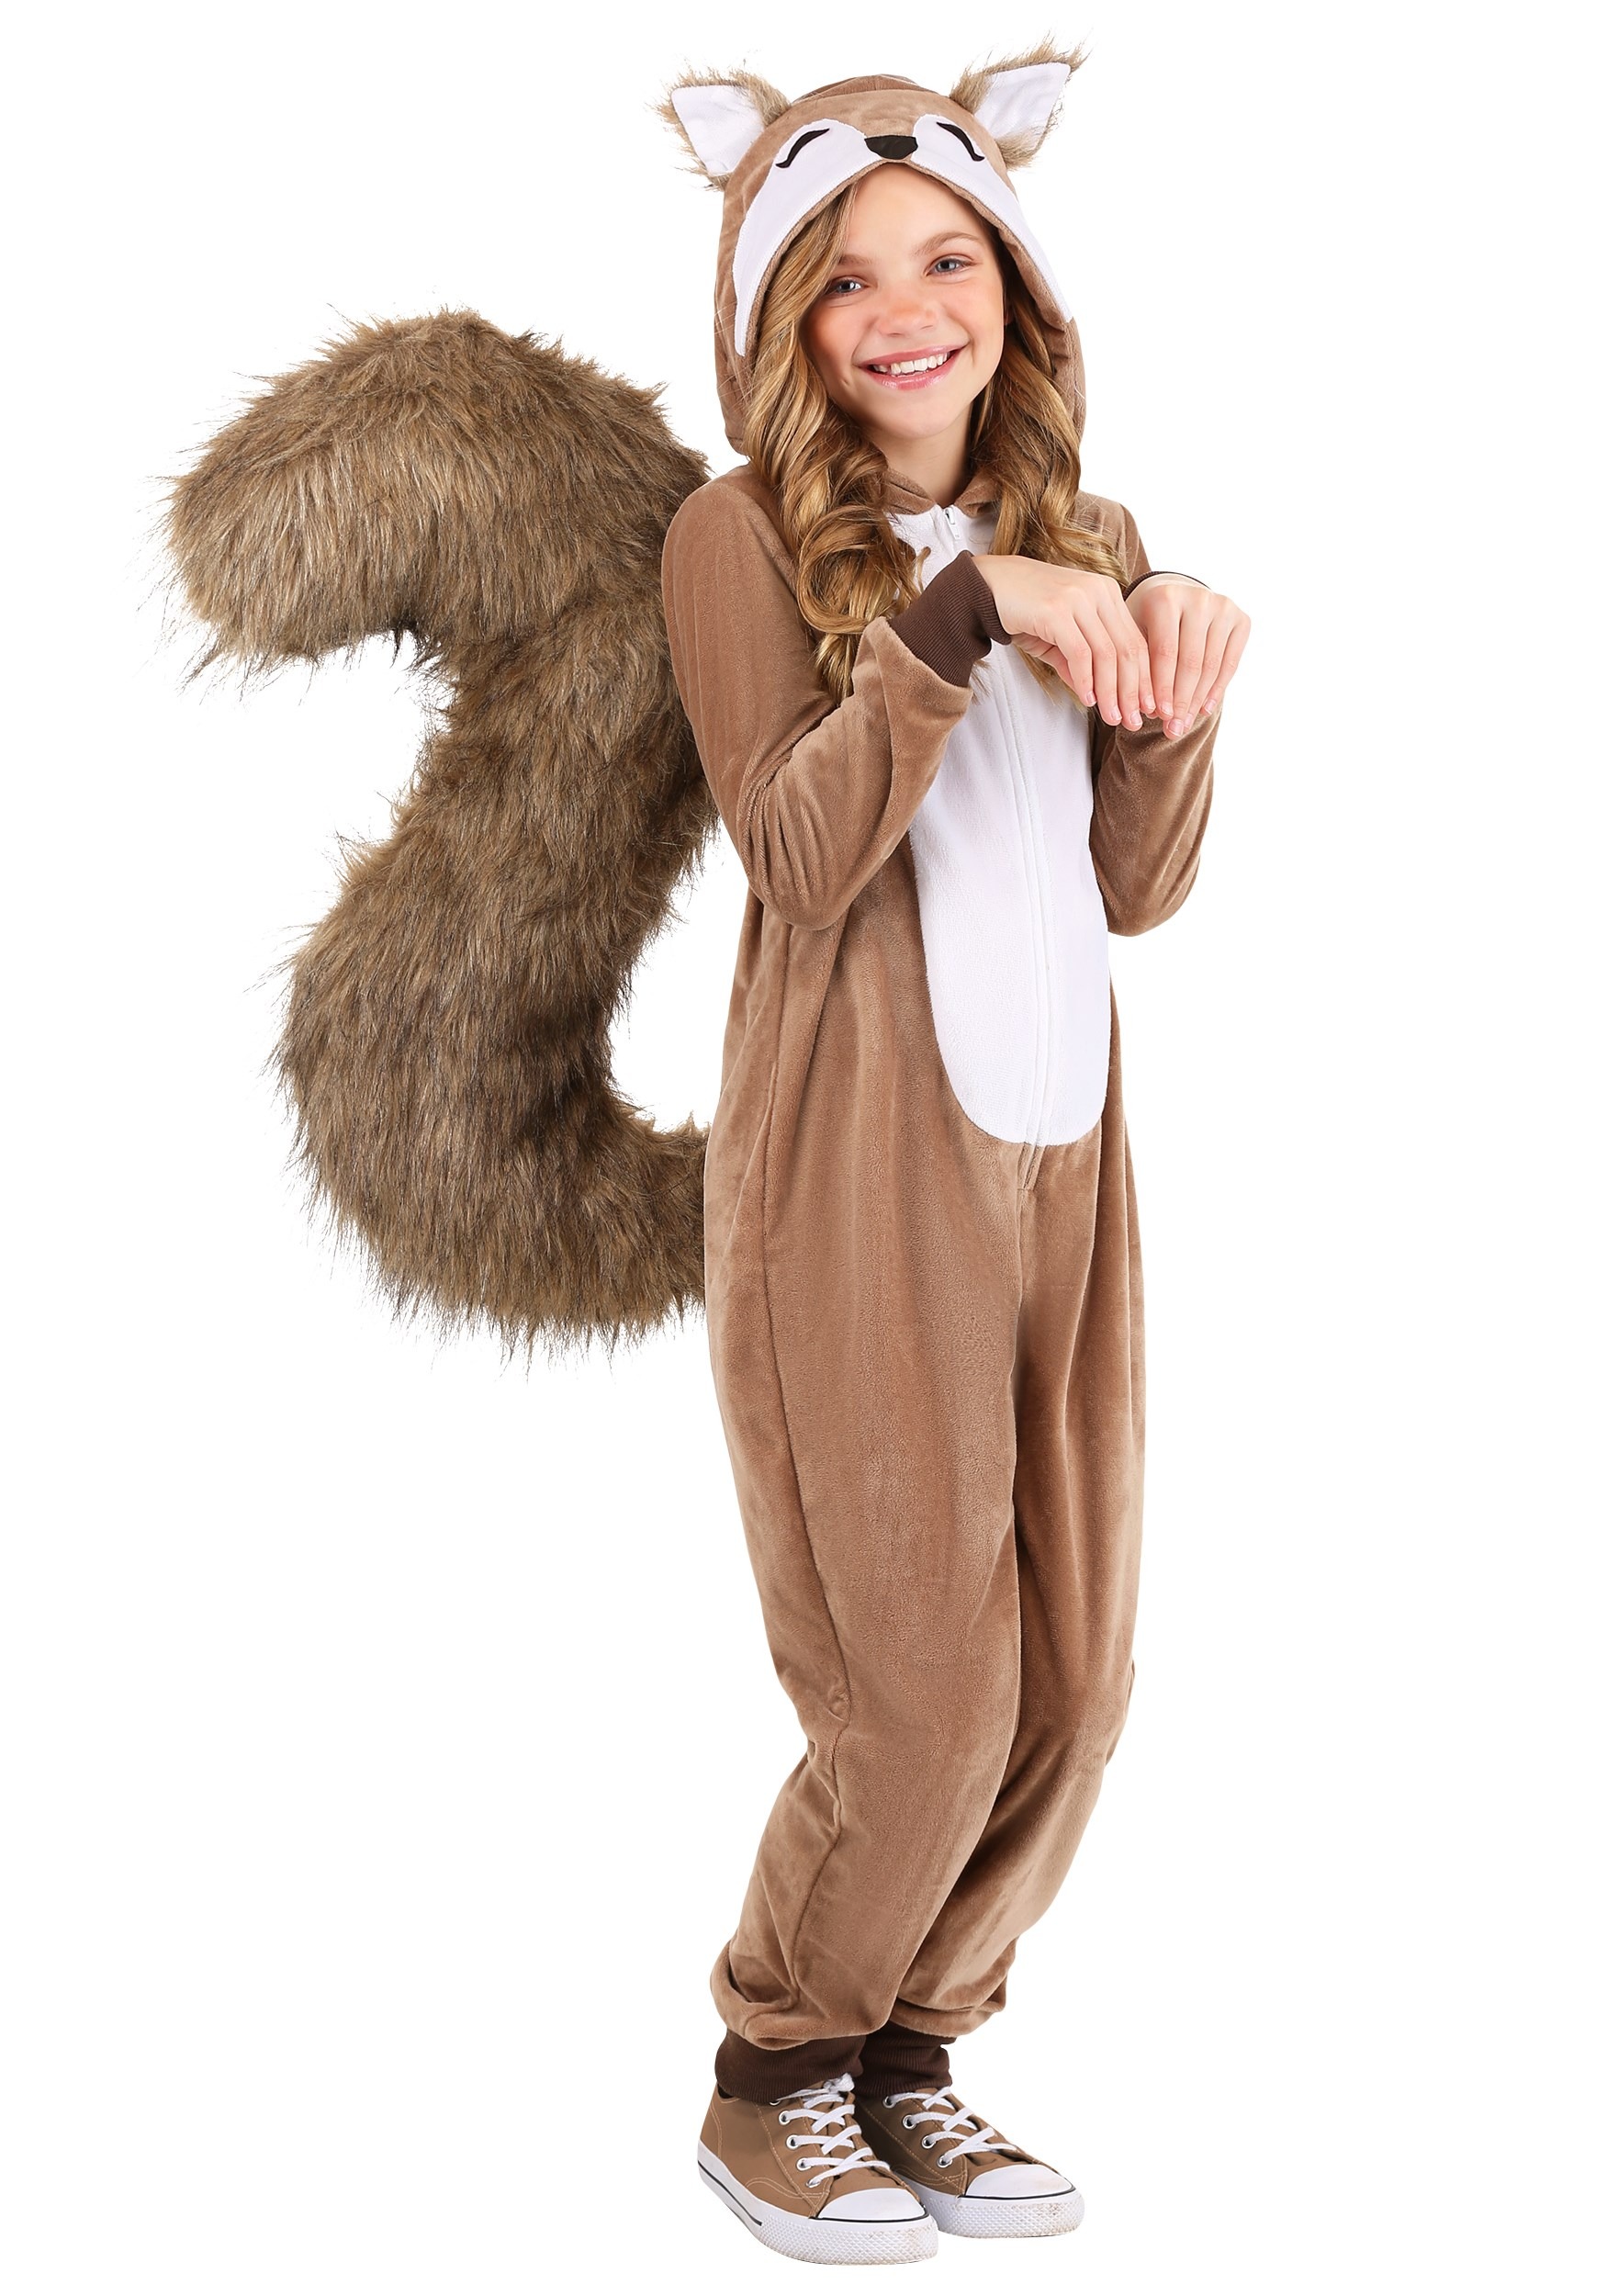 Photos - Fancy Dress FUN Costumes Scampering Squirrel Child Costume Brown/White FUN1352CH